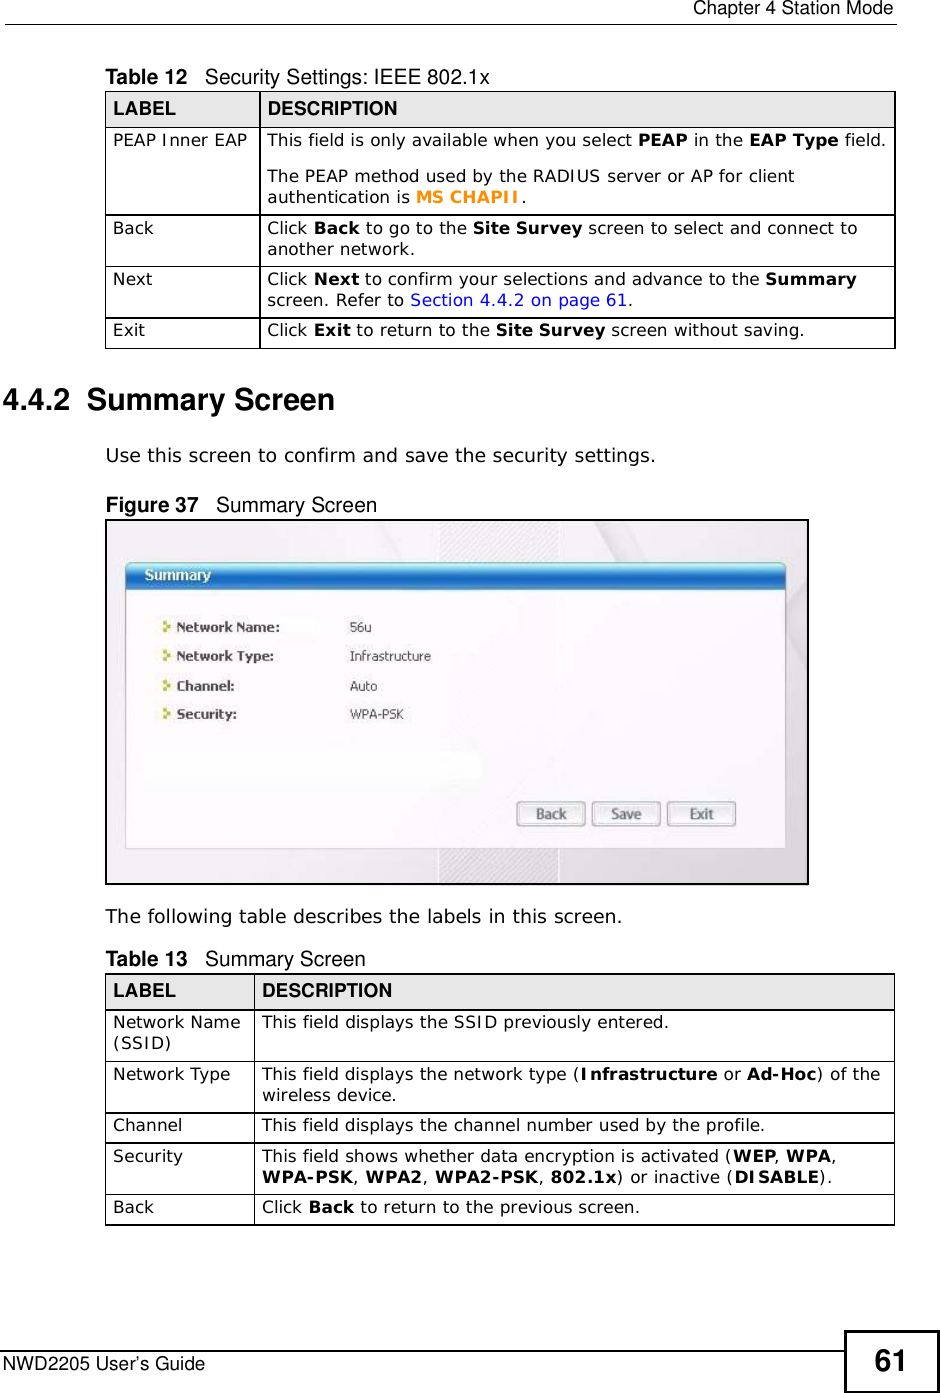  Chapter 4Station ModeNWD2205 User’s Guide 614.4.2  Summary ScreenUse this screen to confirm and save the security settings. Figure 37   Summary Screen The following table describes the labels in this screen.  PEAP Inner EAPThis field is only available when you select PEAP in the EAP Type field.The PEAP method used by the RADIUS server or AP for client authentication is MS CHAPII.BackClick Back to go to the Site Survey screen to select and connect to another network.NextClick Next to confirm your selections and advance to the Summary screen. Refer to Section 4.4.2 on page 61.ExitClick Exit to return to the Site Survey screen without saving.Table 12   Security Settings: IEEE 802.1xLABEL DESCRIPTIONTable 13   Summary ScreenLABEL DESCRIPTIONNetwork Name (SSID) This field displays the SSID previously entered.Network TypeThis field displays the network type (Infrastructure or Ad-Hoc) of the wireless device.ChannelThis field displays the channel number used by the profile.SecurityThis field shows whether data encryption is activated (WEP,WPA,WPA-PSK,WPA2,WPA2-PSK, 802.1x) or inactive (DISABLE).BackClick Back to return to the previousscreen.